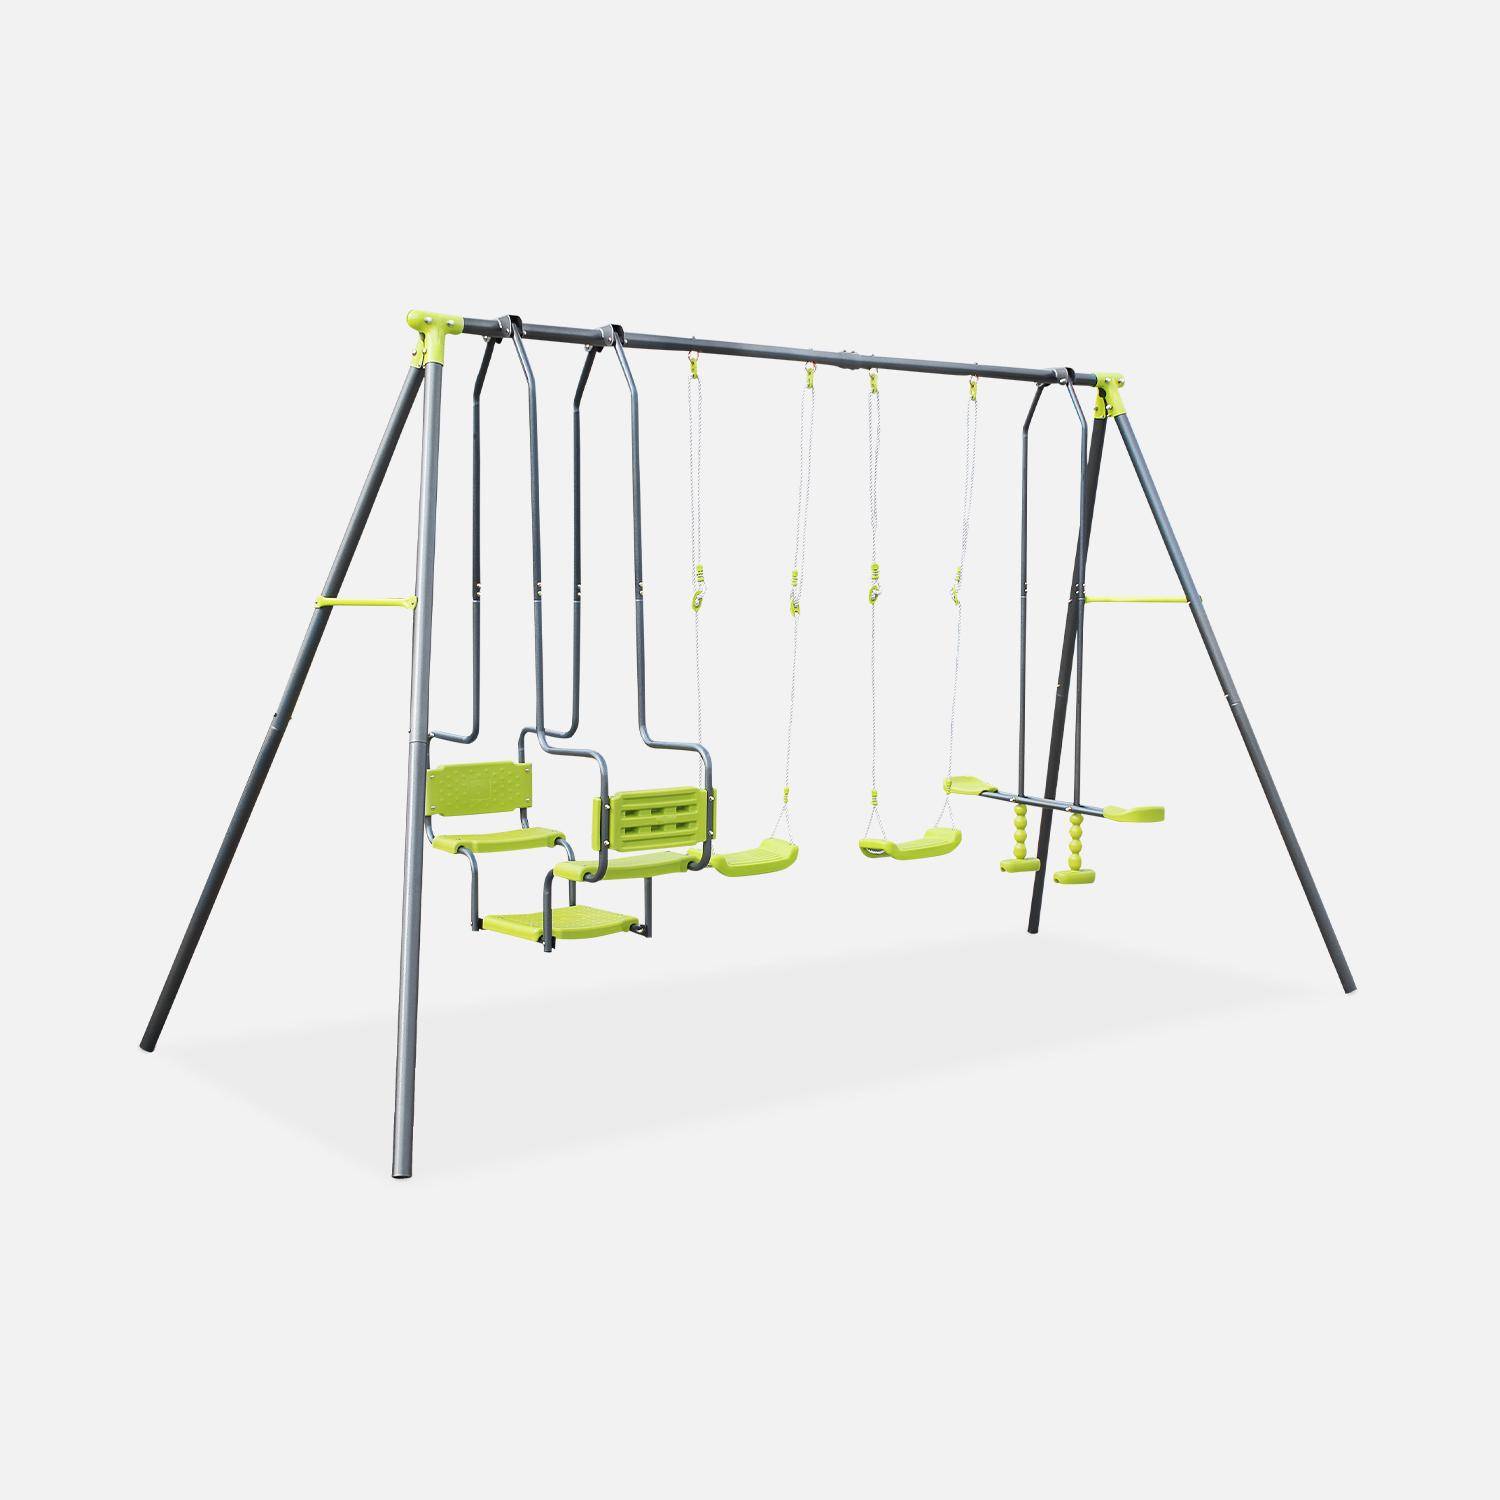 Swing set with 2 swings, 1 tandem swing and 1 two-seated glider, height 223cm,sweeek,Photo1